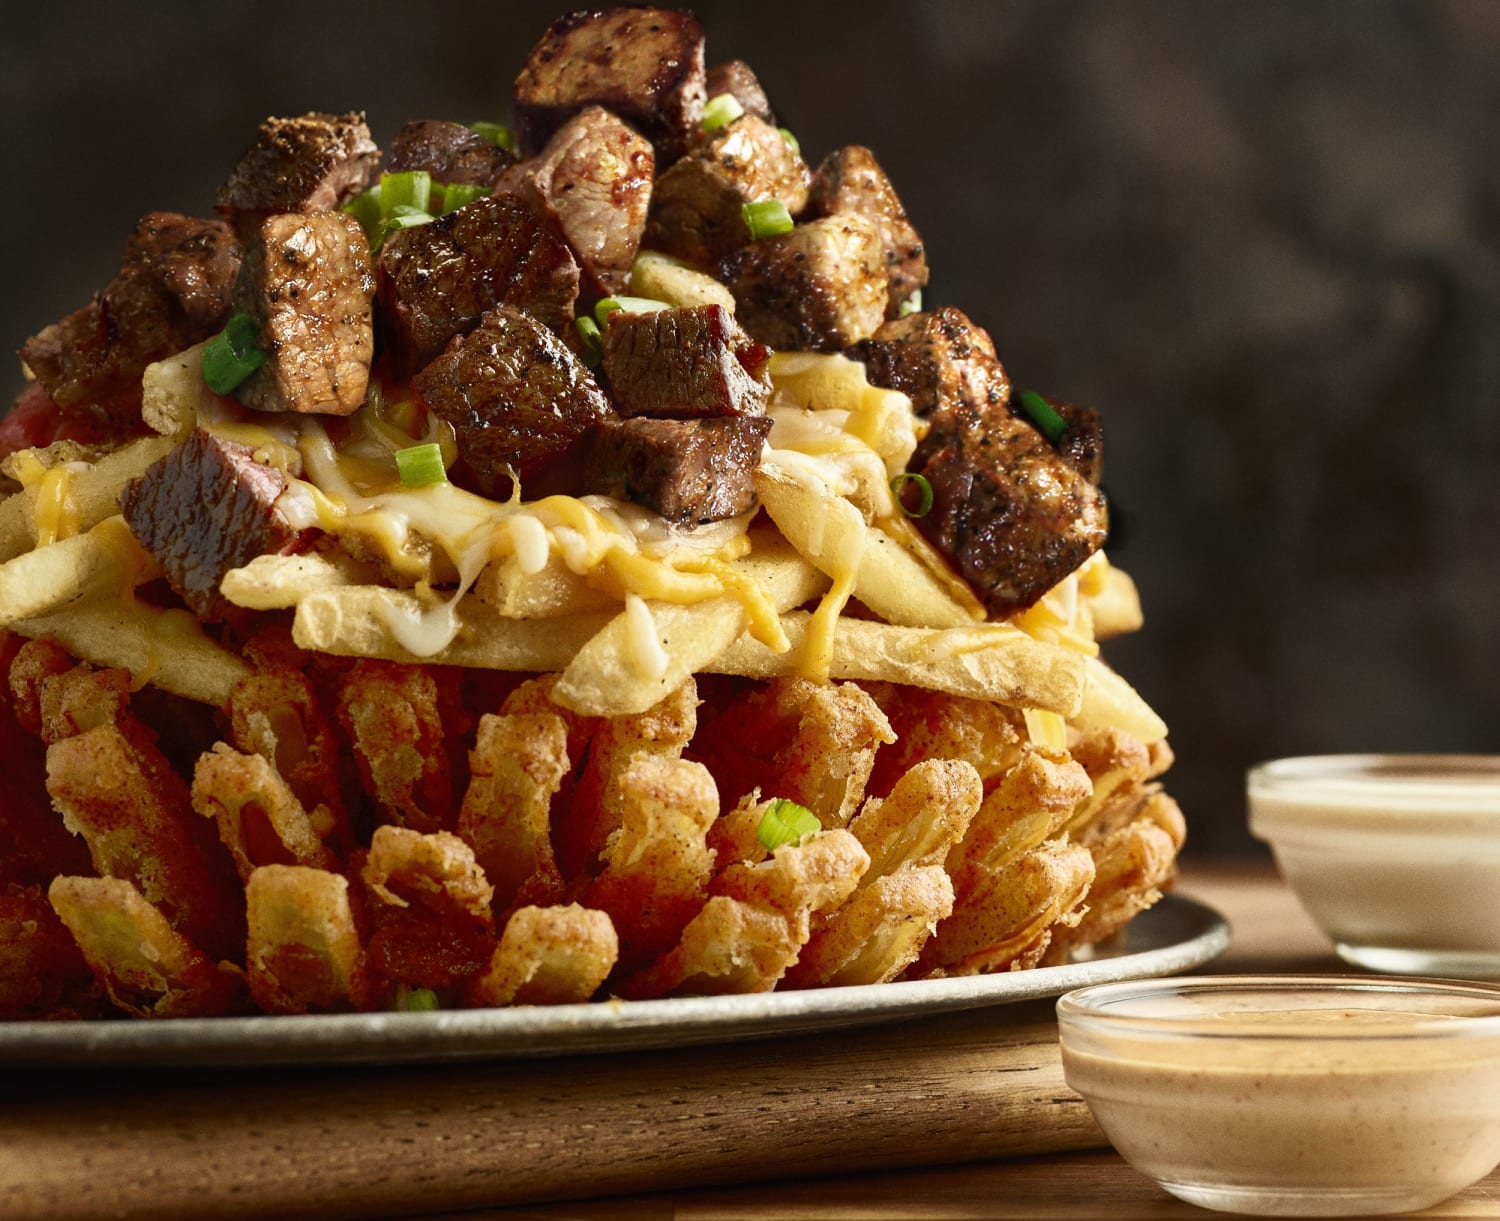 The Bloomin' Onion